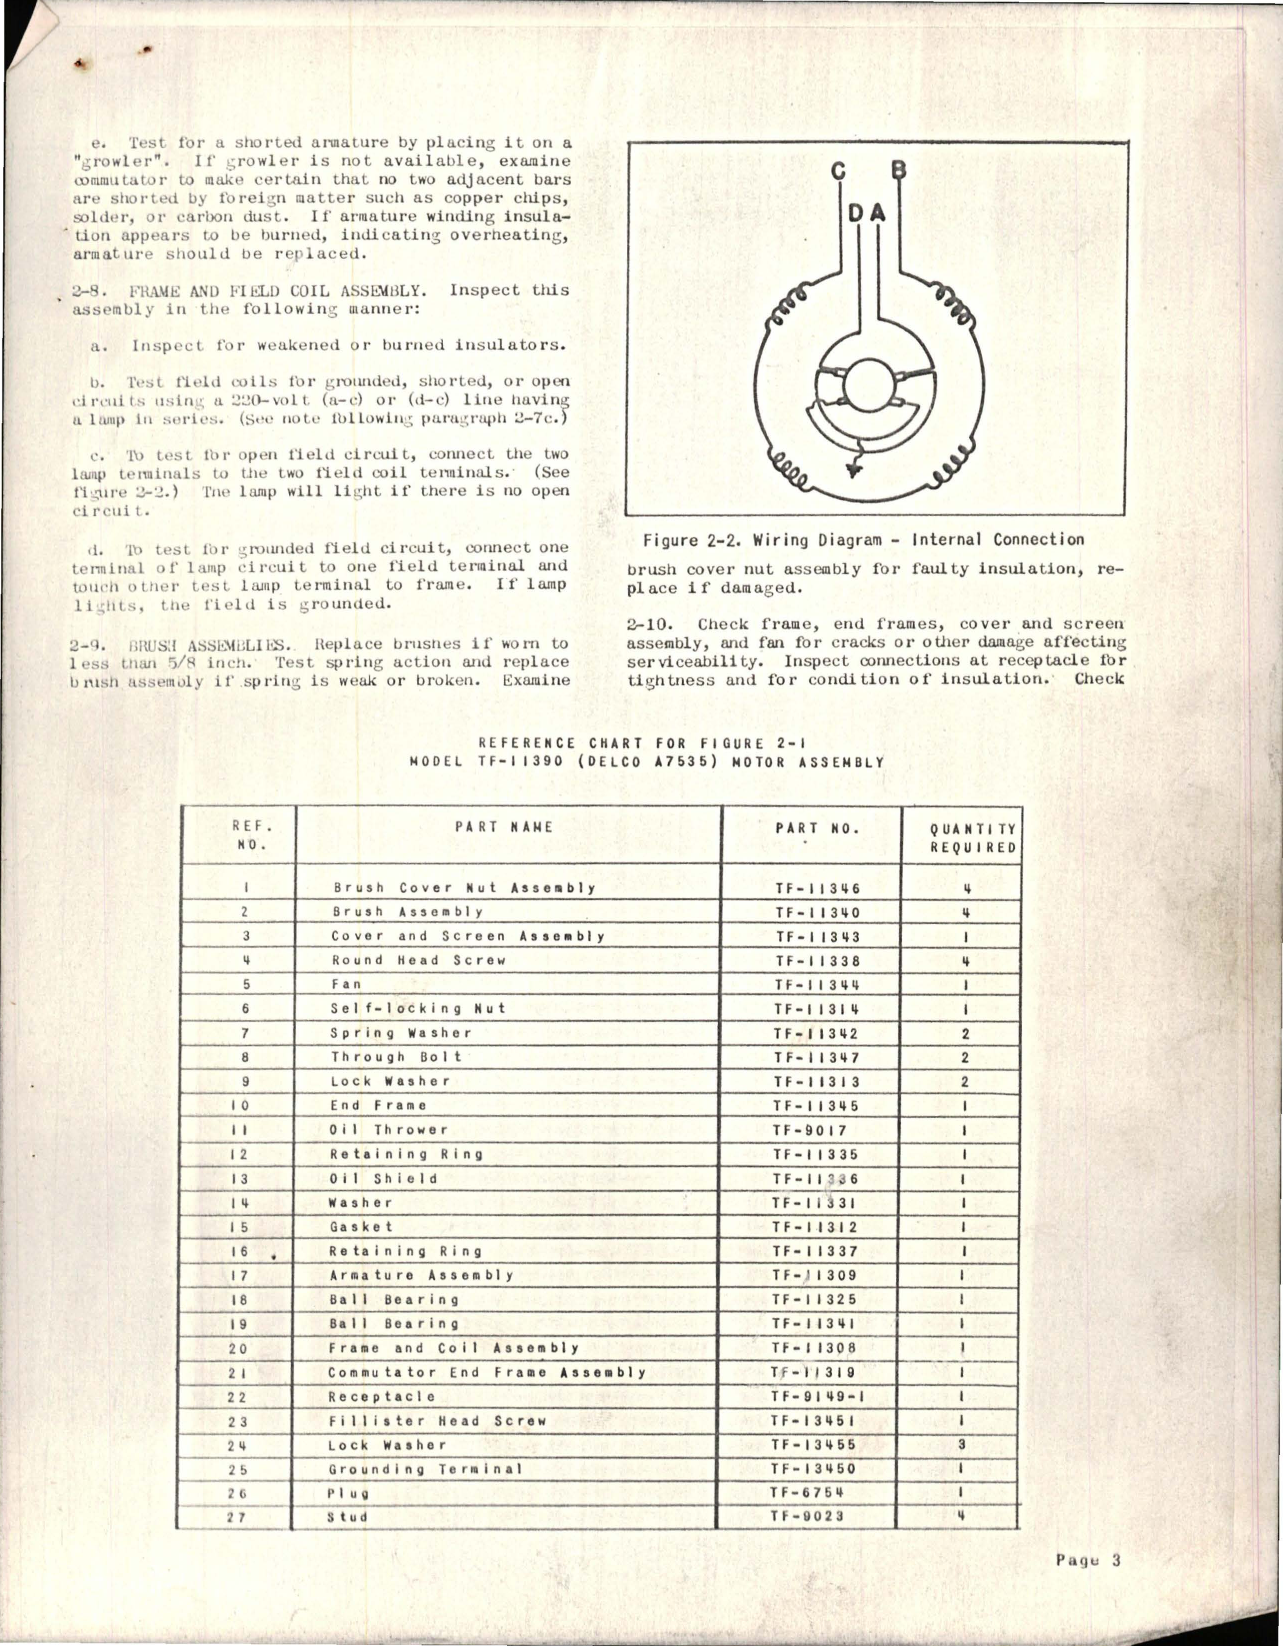 Sample page 5 from AirCorps Library document: Handbook of Instructions for Model TF-11390 Motor Assembly - Delco A-7535